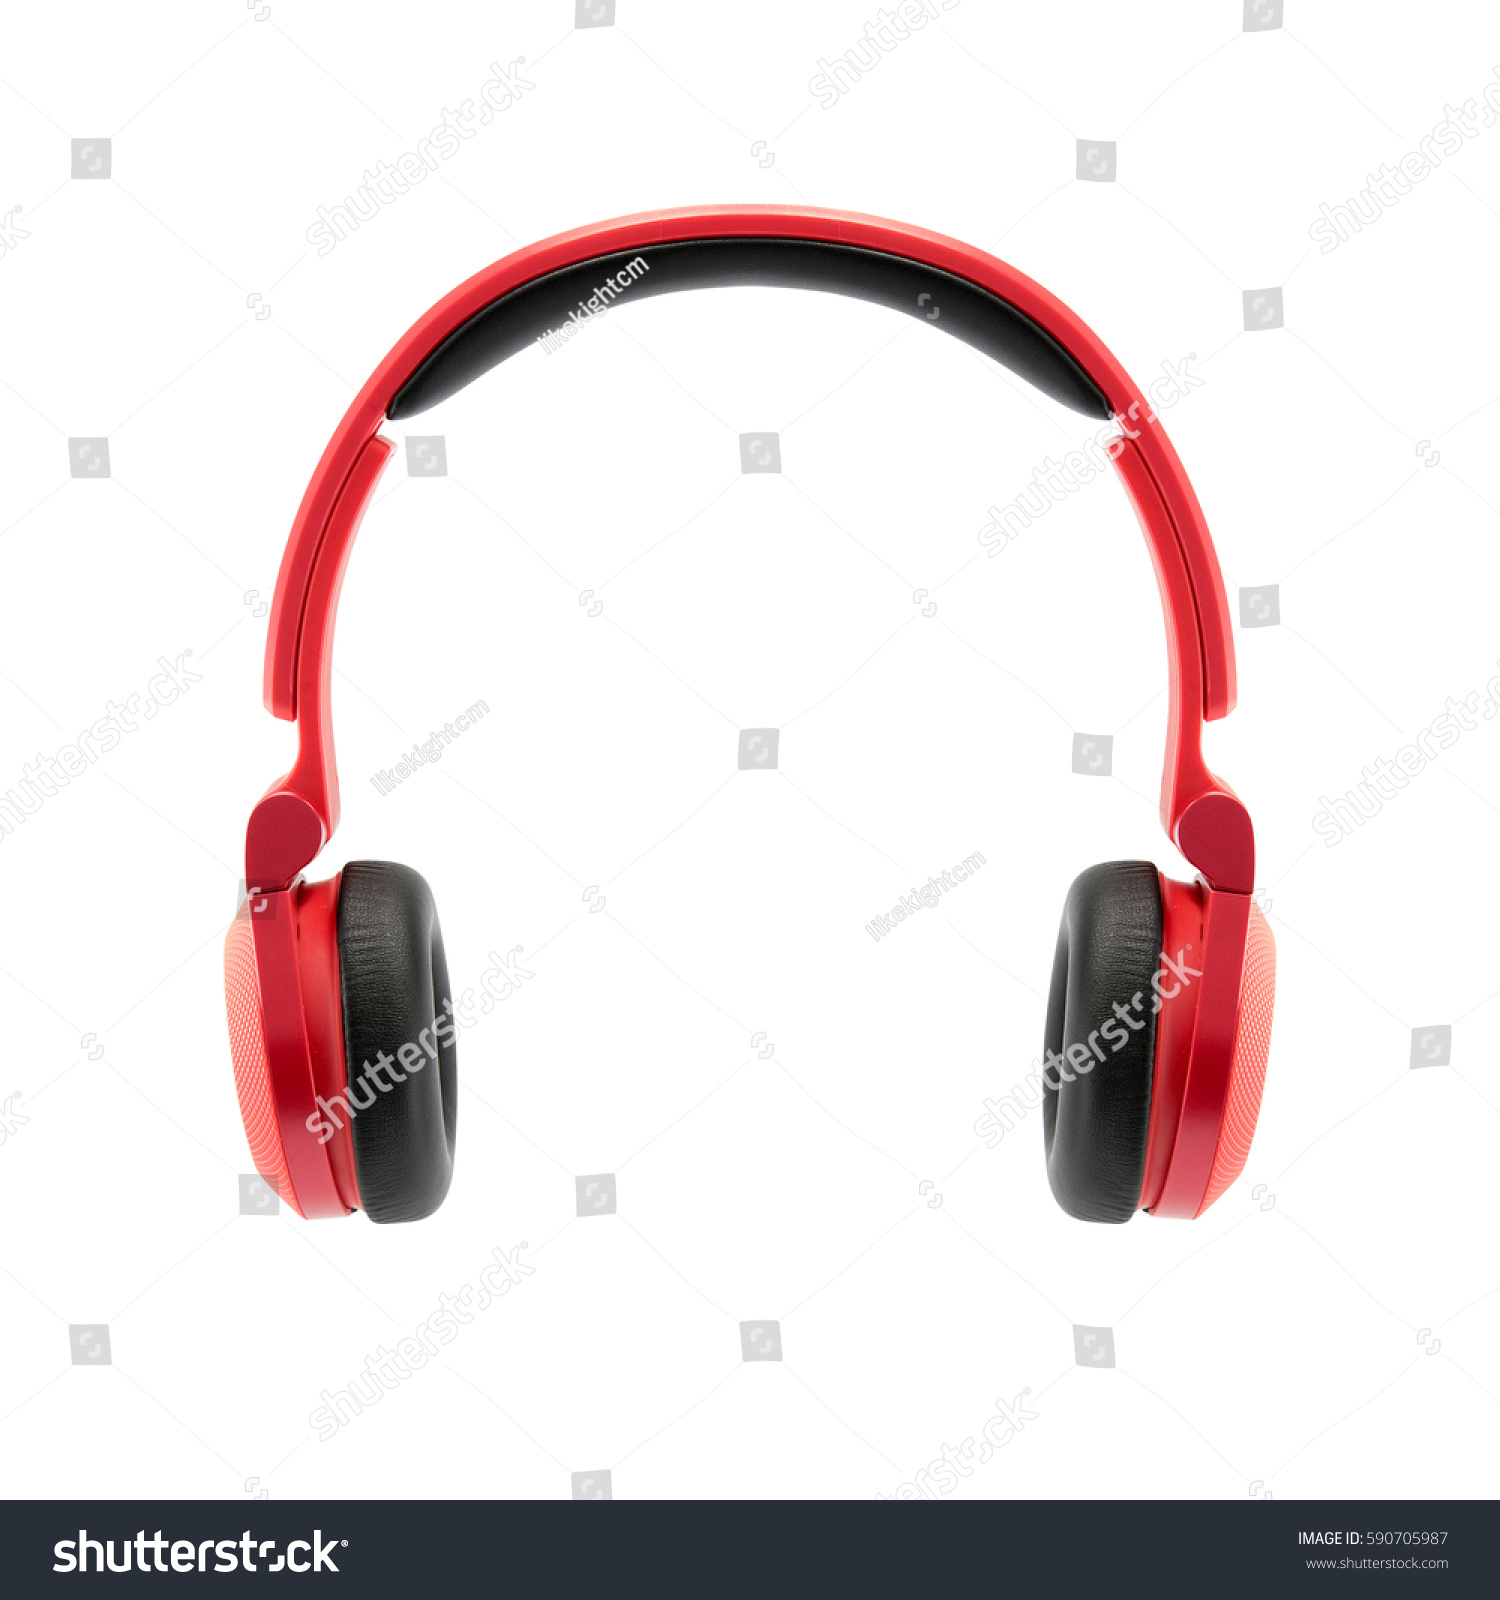 red headphone on white background, isolated #590705987